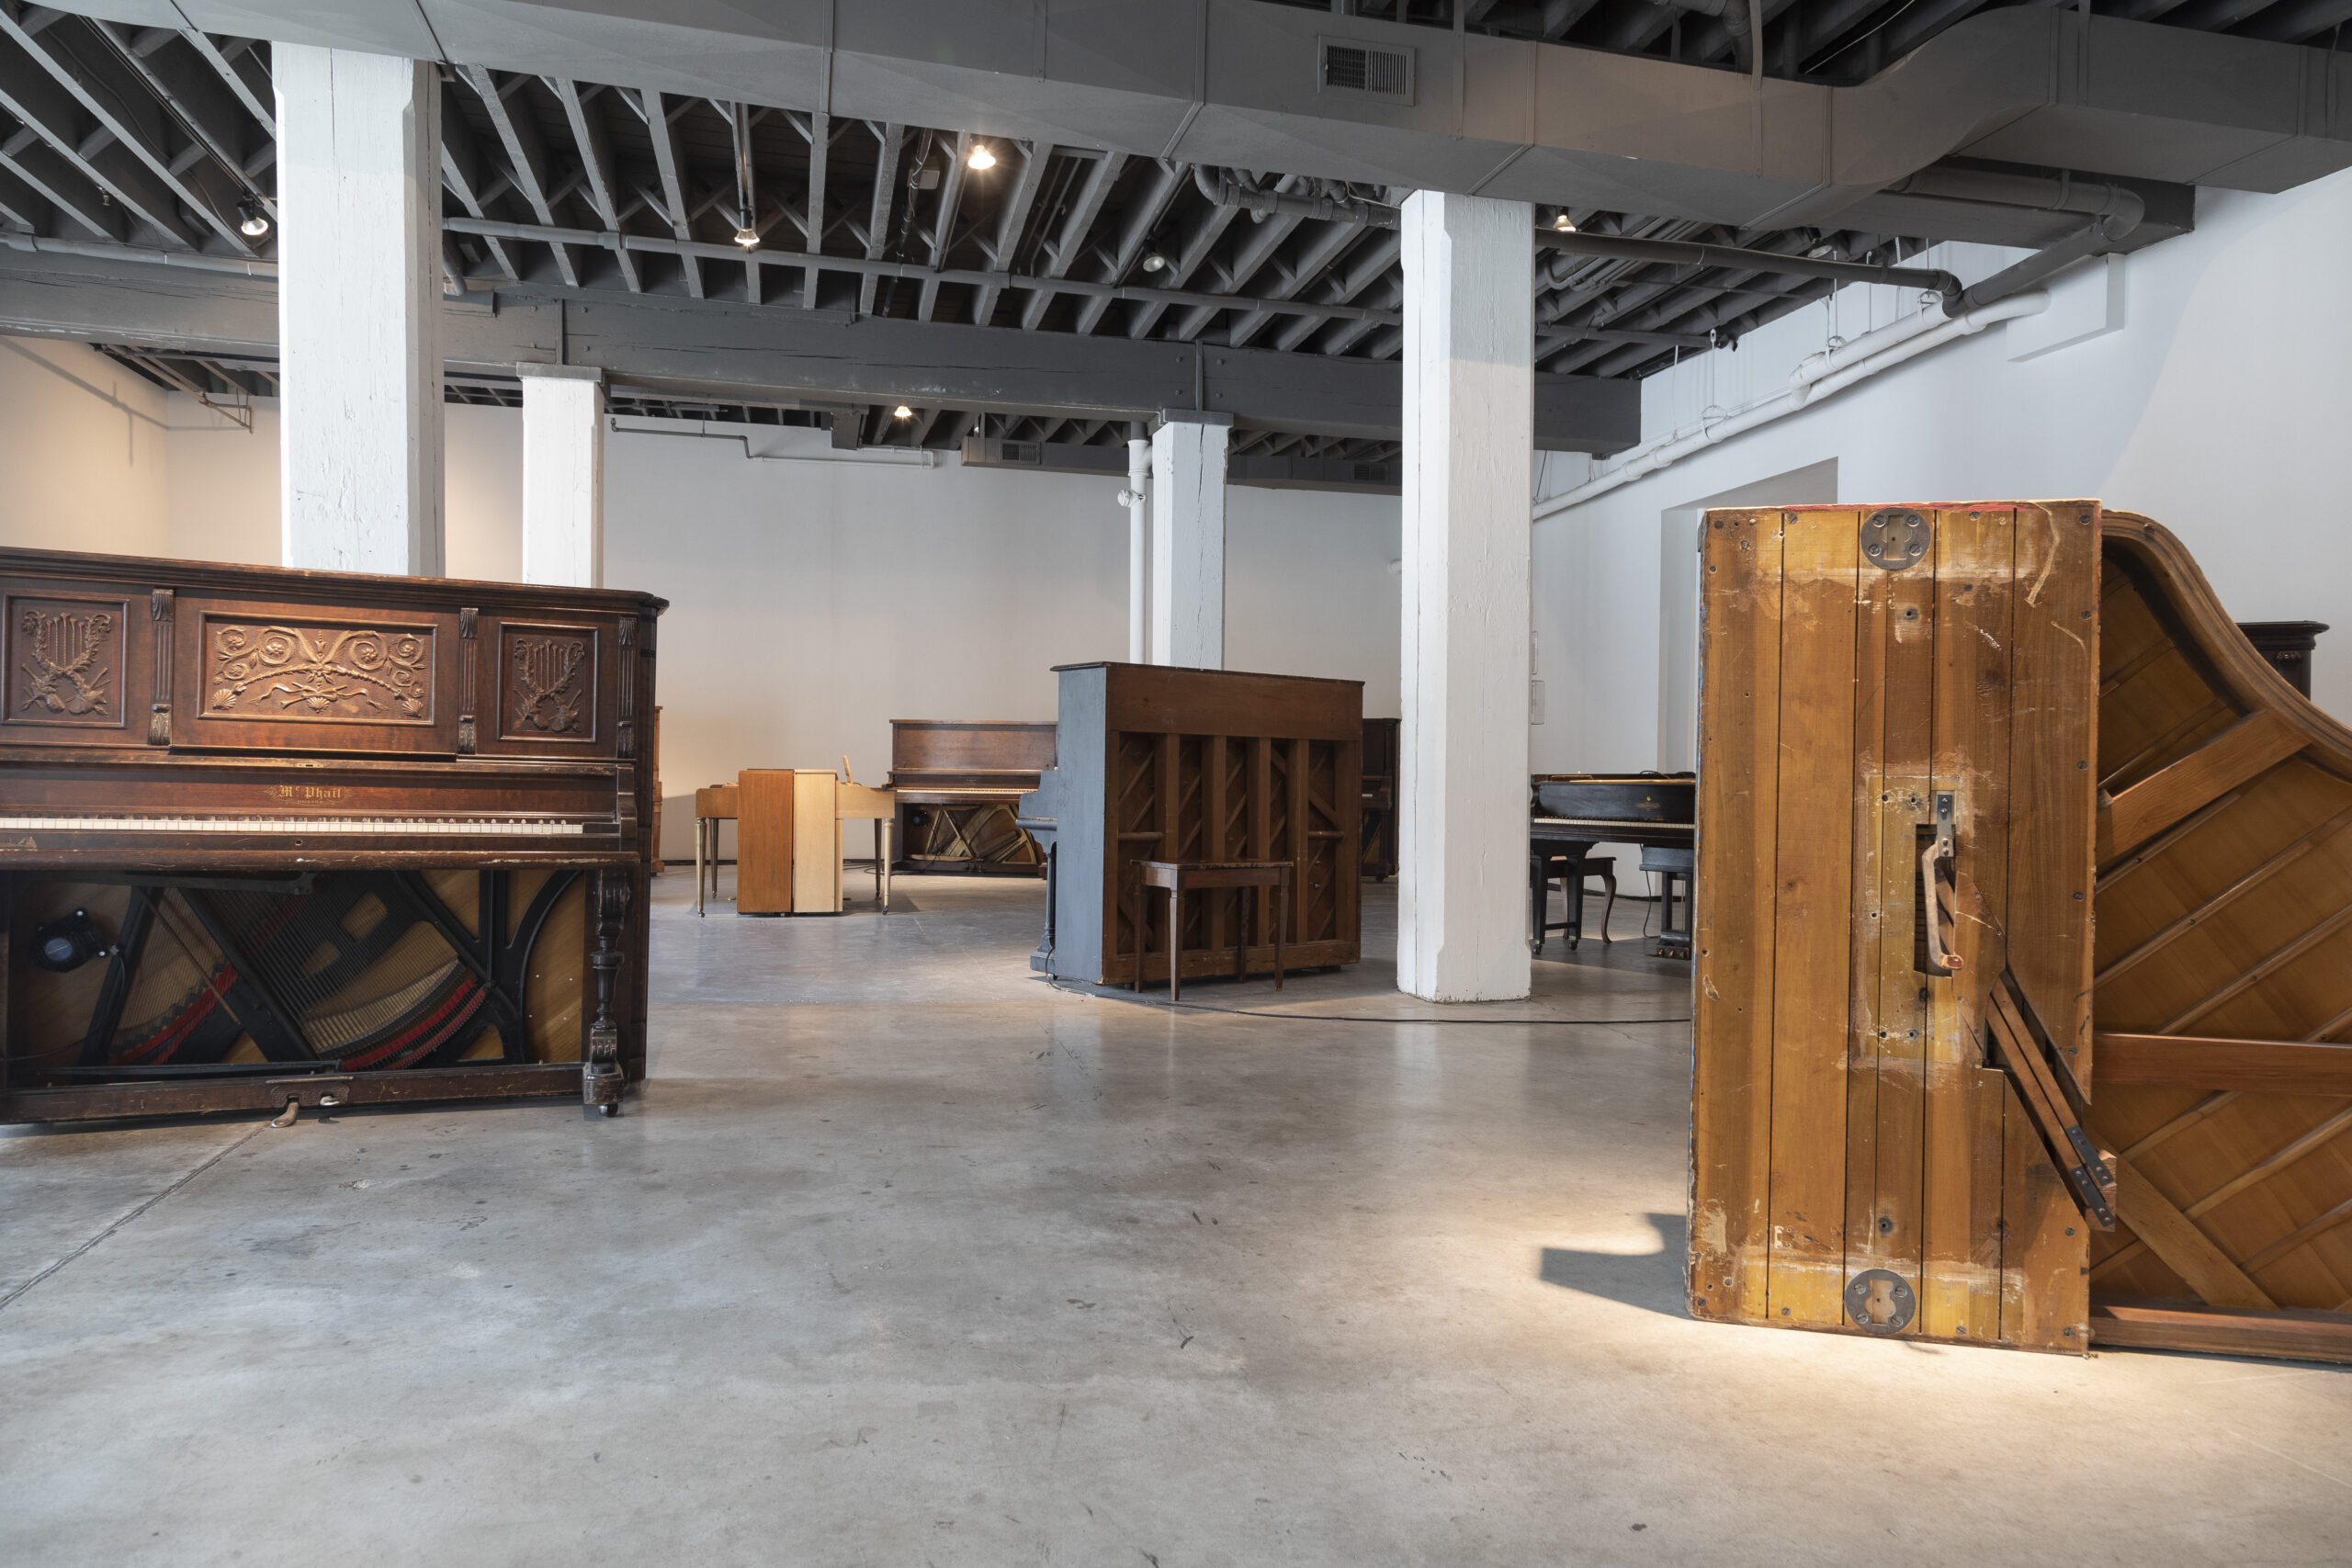 Featured image: Maya Dunietz. Installation view of Root of Two, 2022. On viewfrom May 7—September 18, 2022at Bemis Center for ContemporaryArts, Omaha, NE. Courtesy of the artist and Bemis Center for Contemporary Arts. Photography by Assaf Evron.